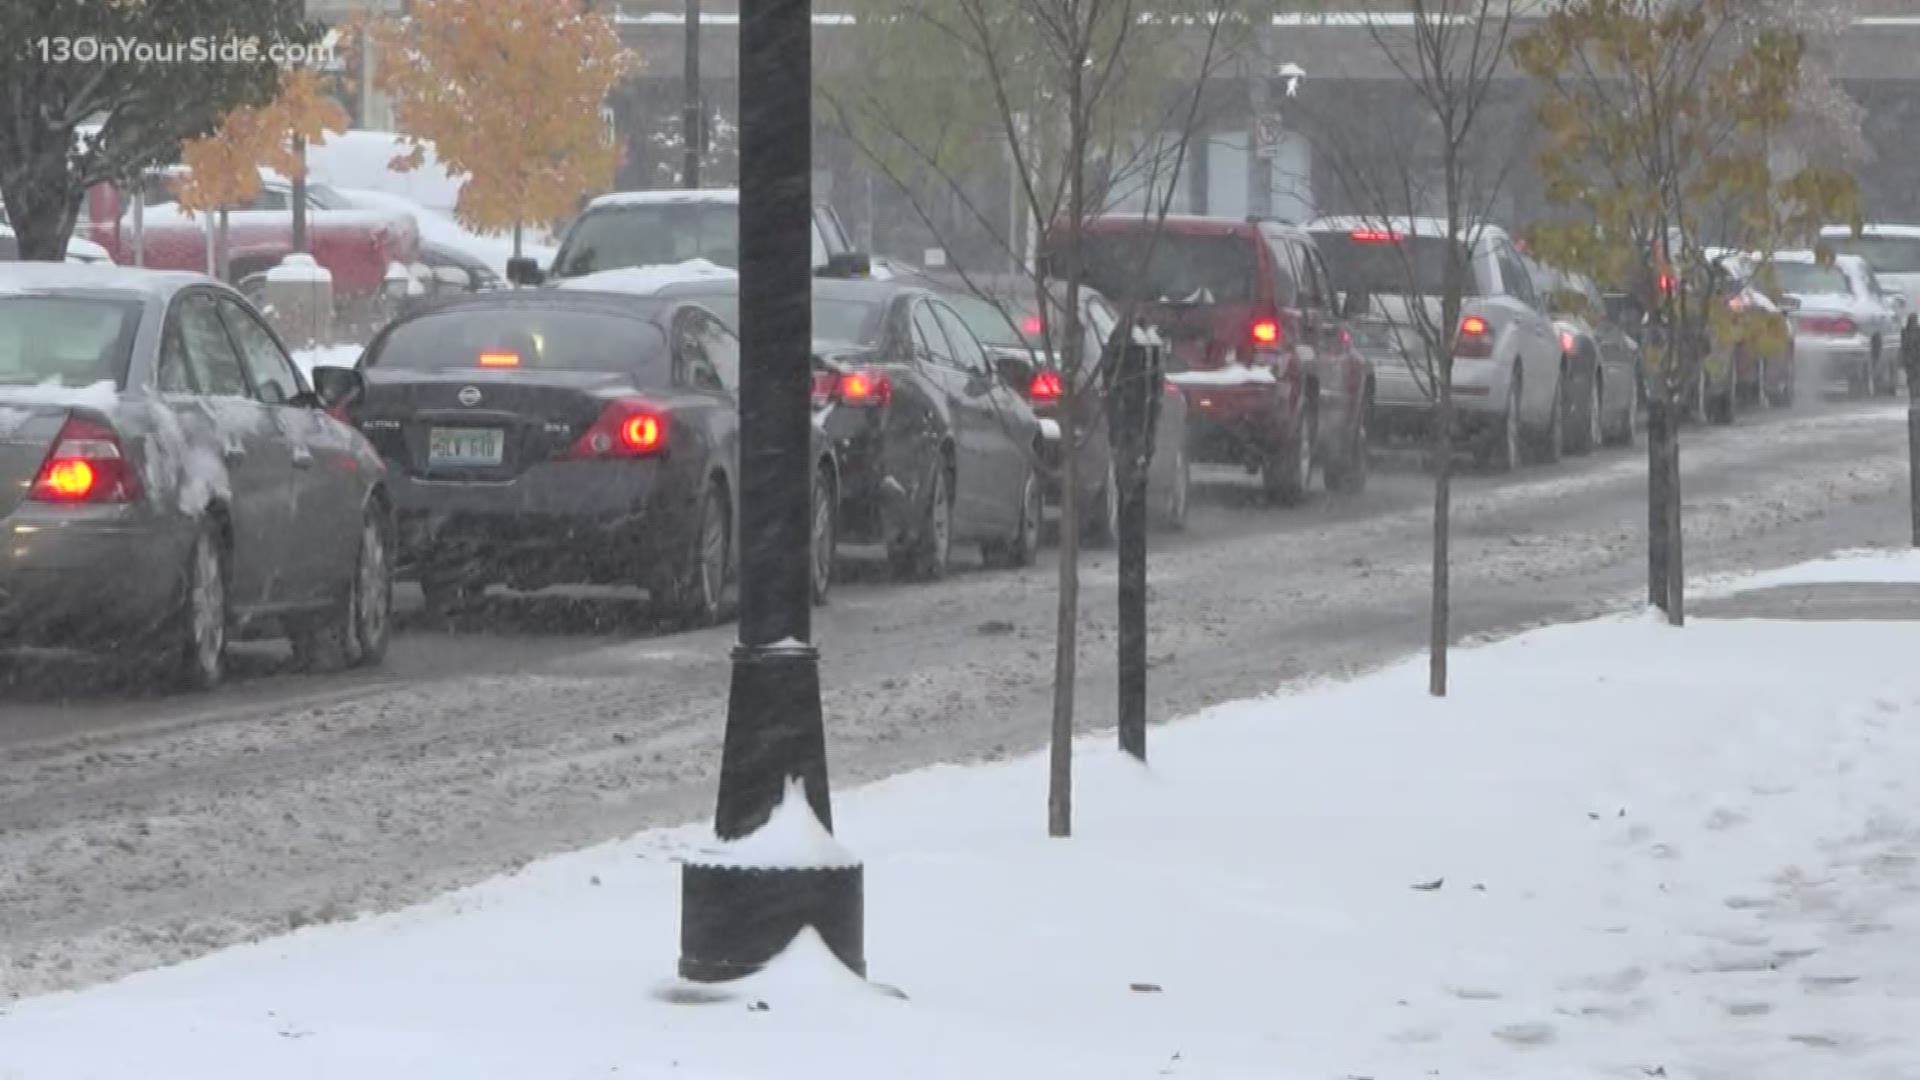 The roads are getting better, but drivers are still encouraged to stay safe.